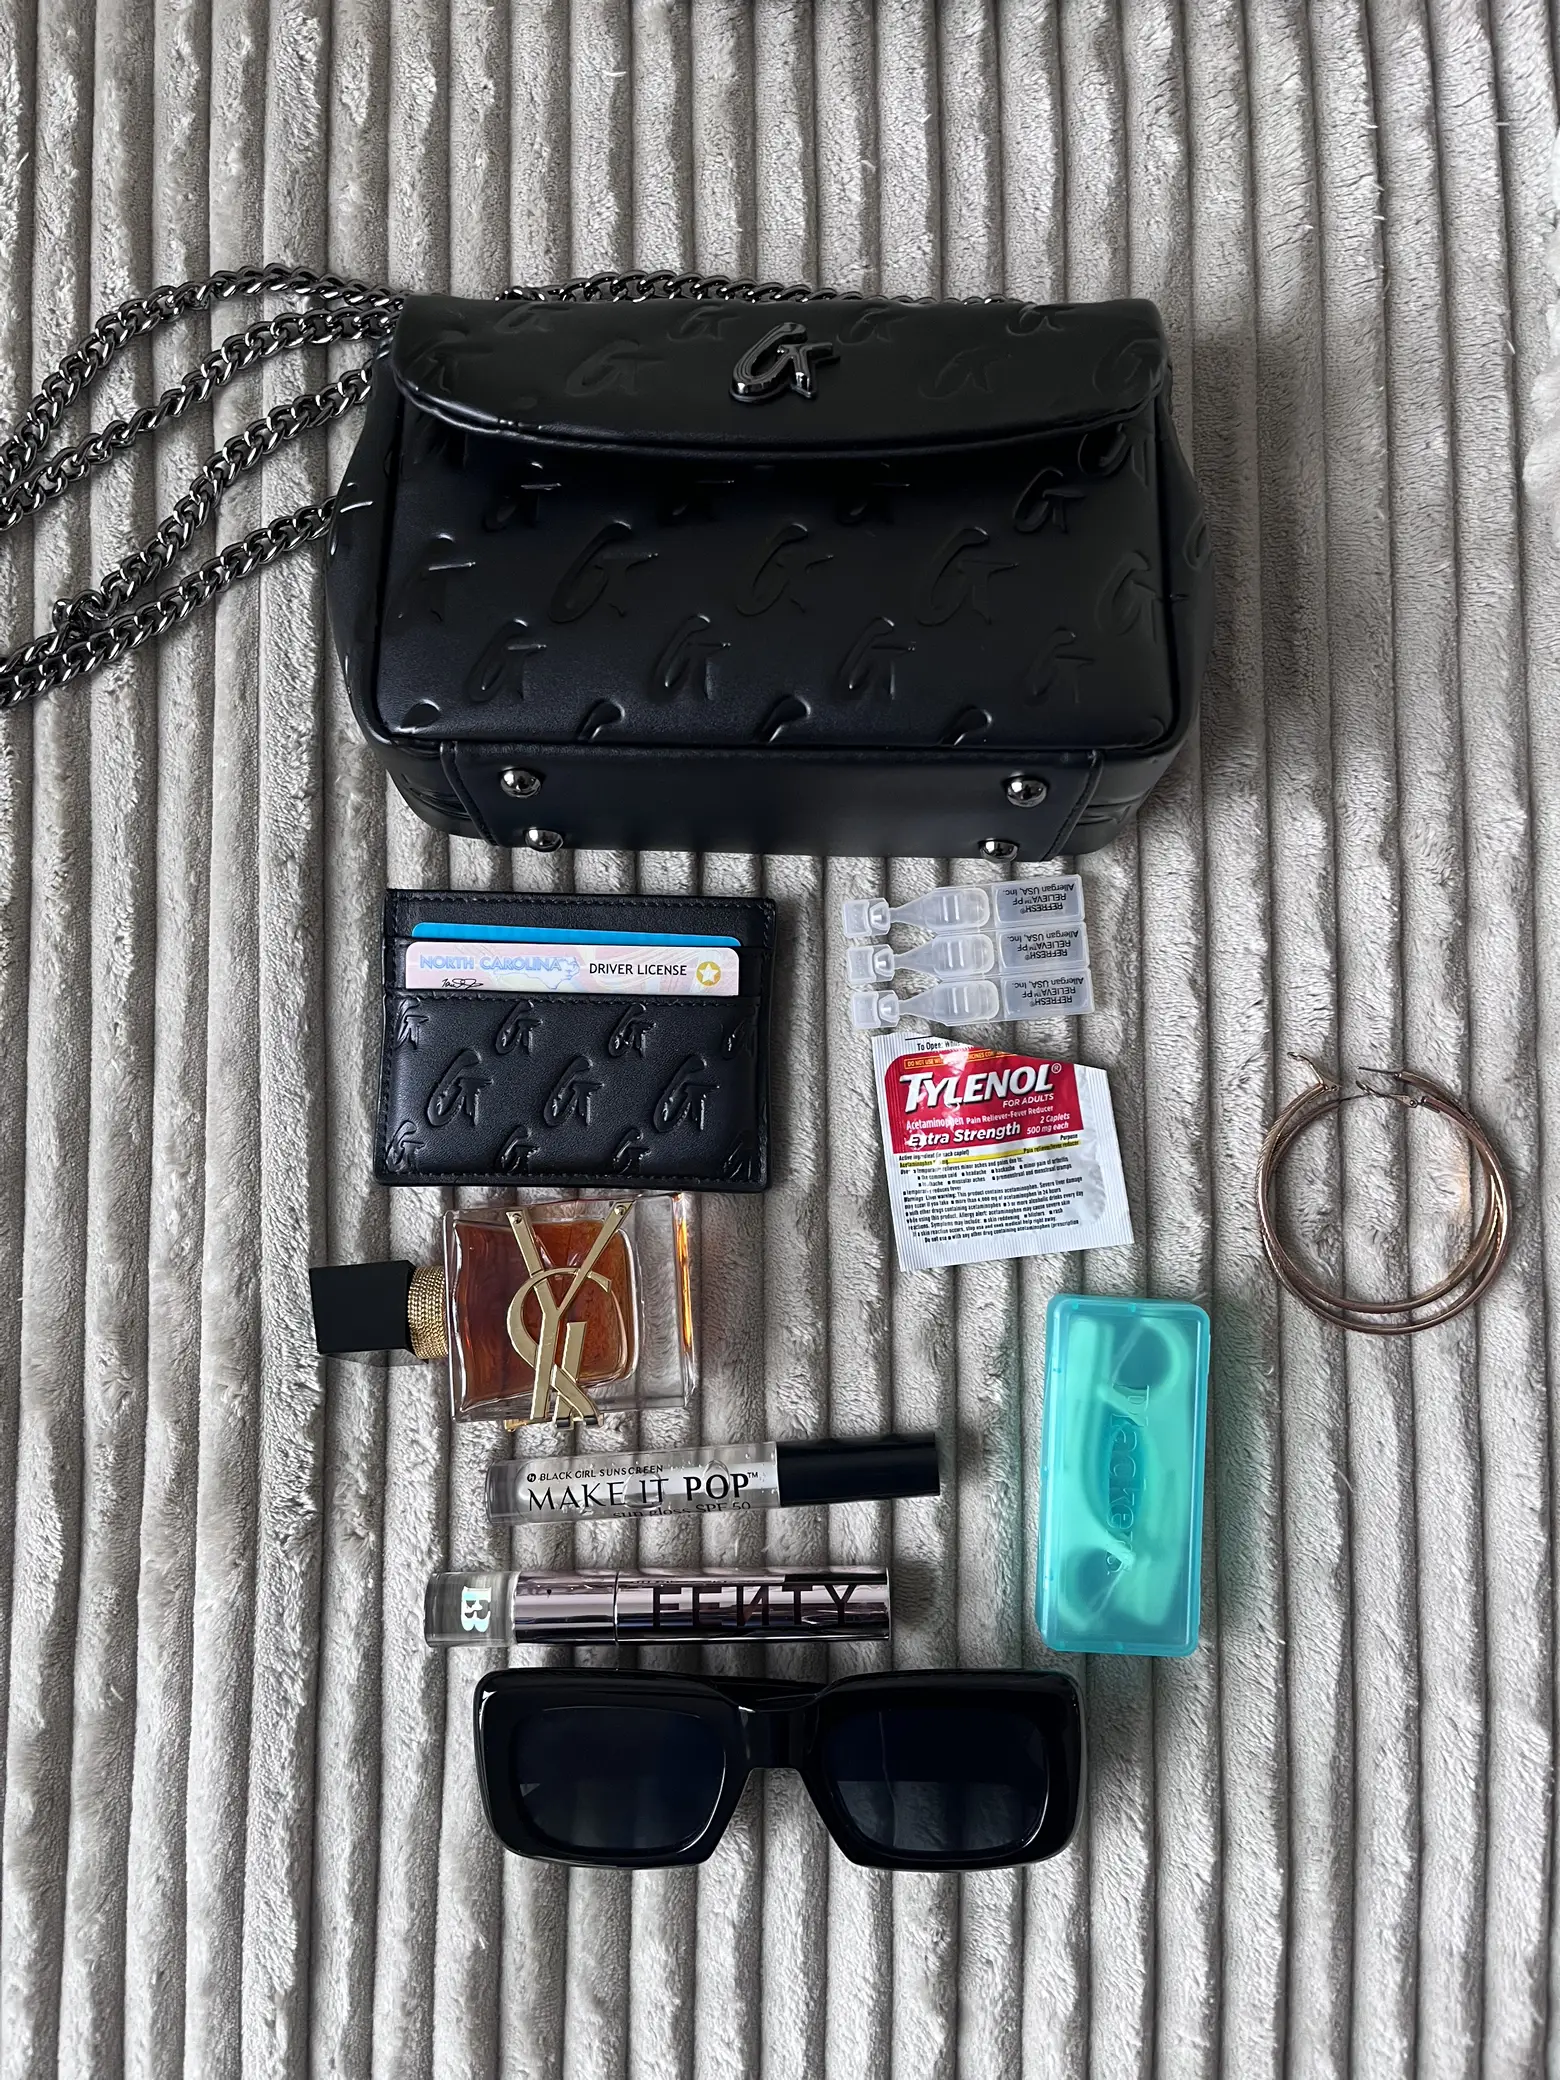 GLAMAHOLIC, WHAT'S IN MY BAG?